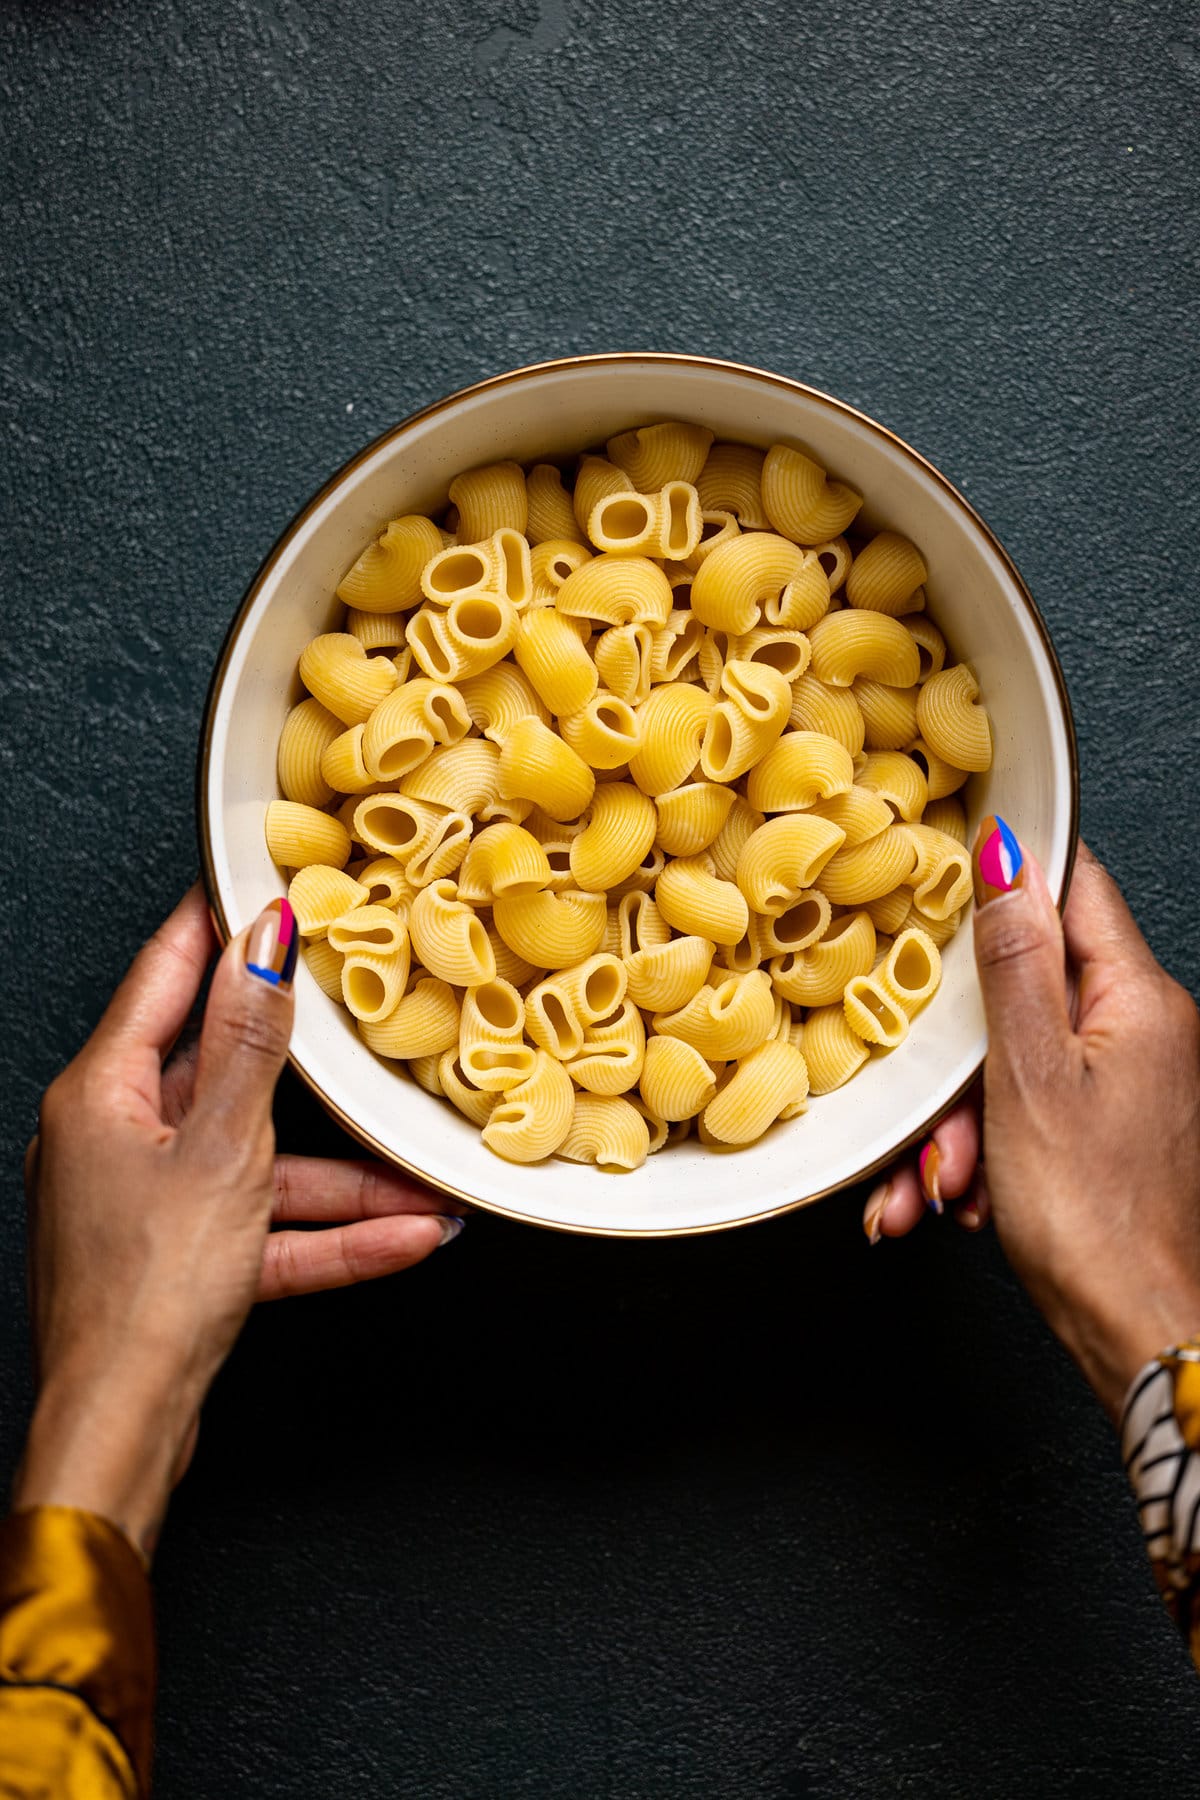 Hands holding a bowl of cooked pasta